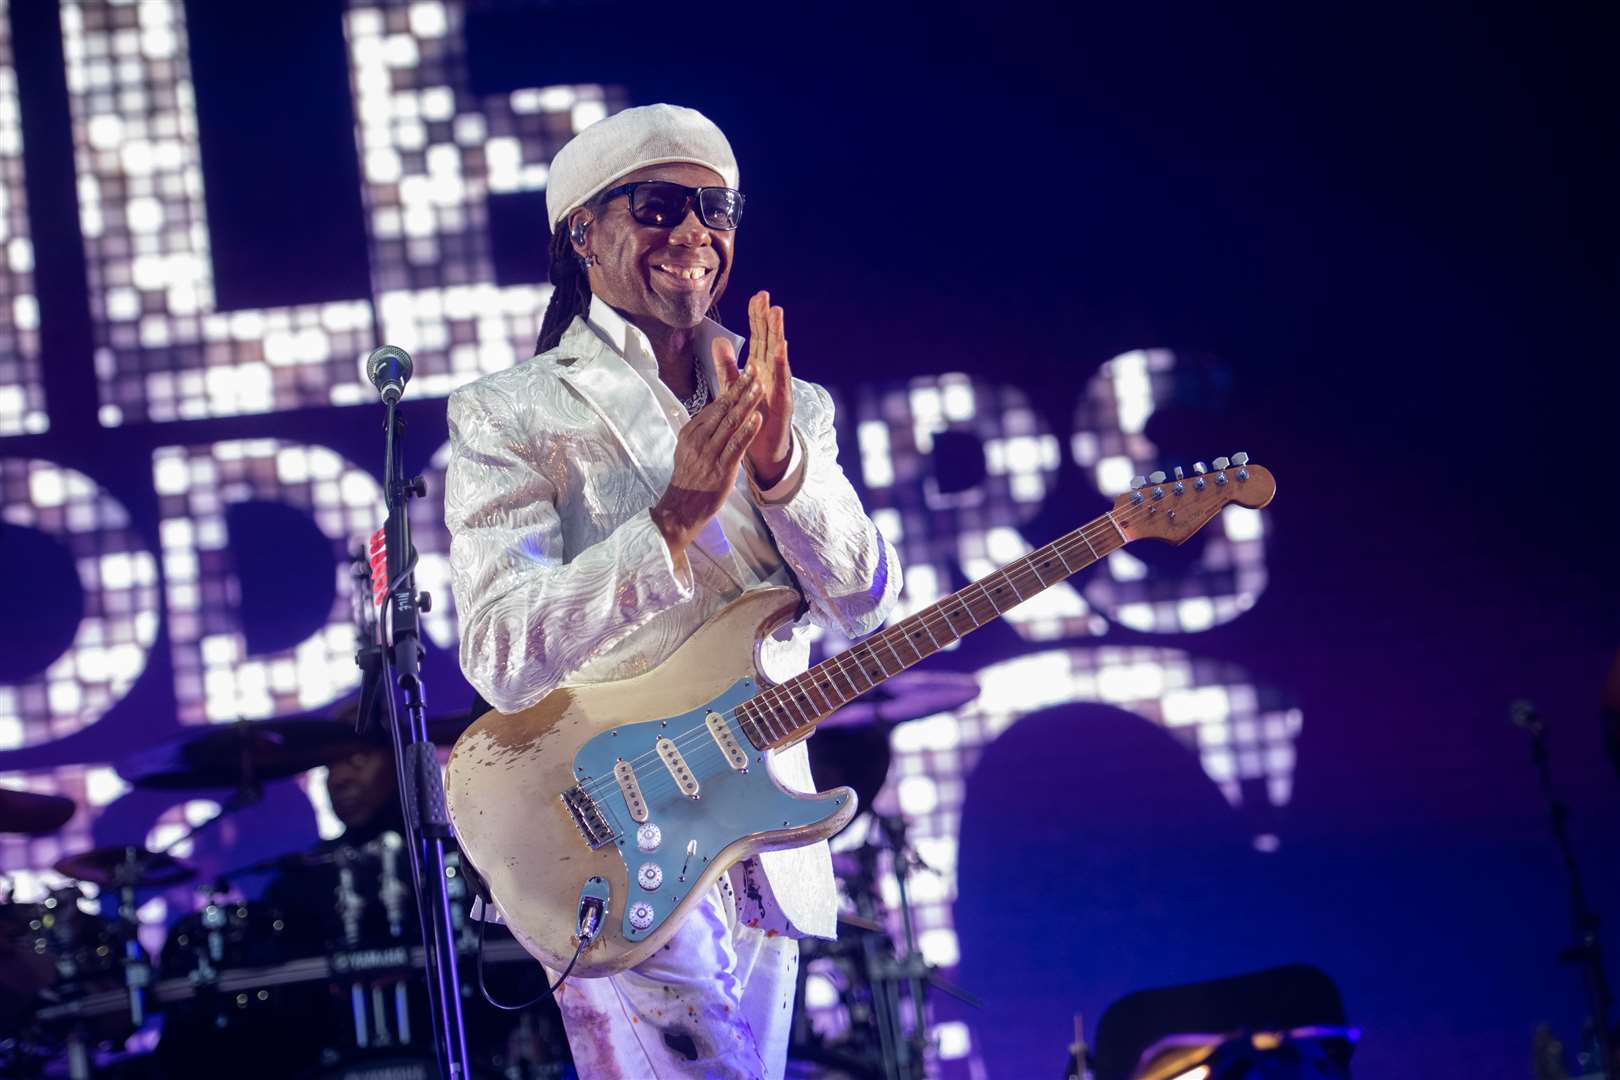 Nile Rodgers and Chic headlined on Saturday.